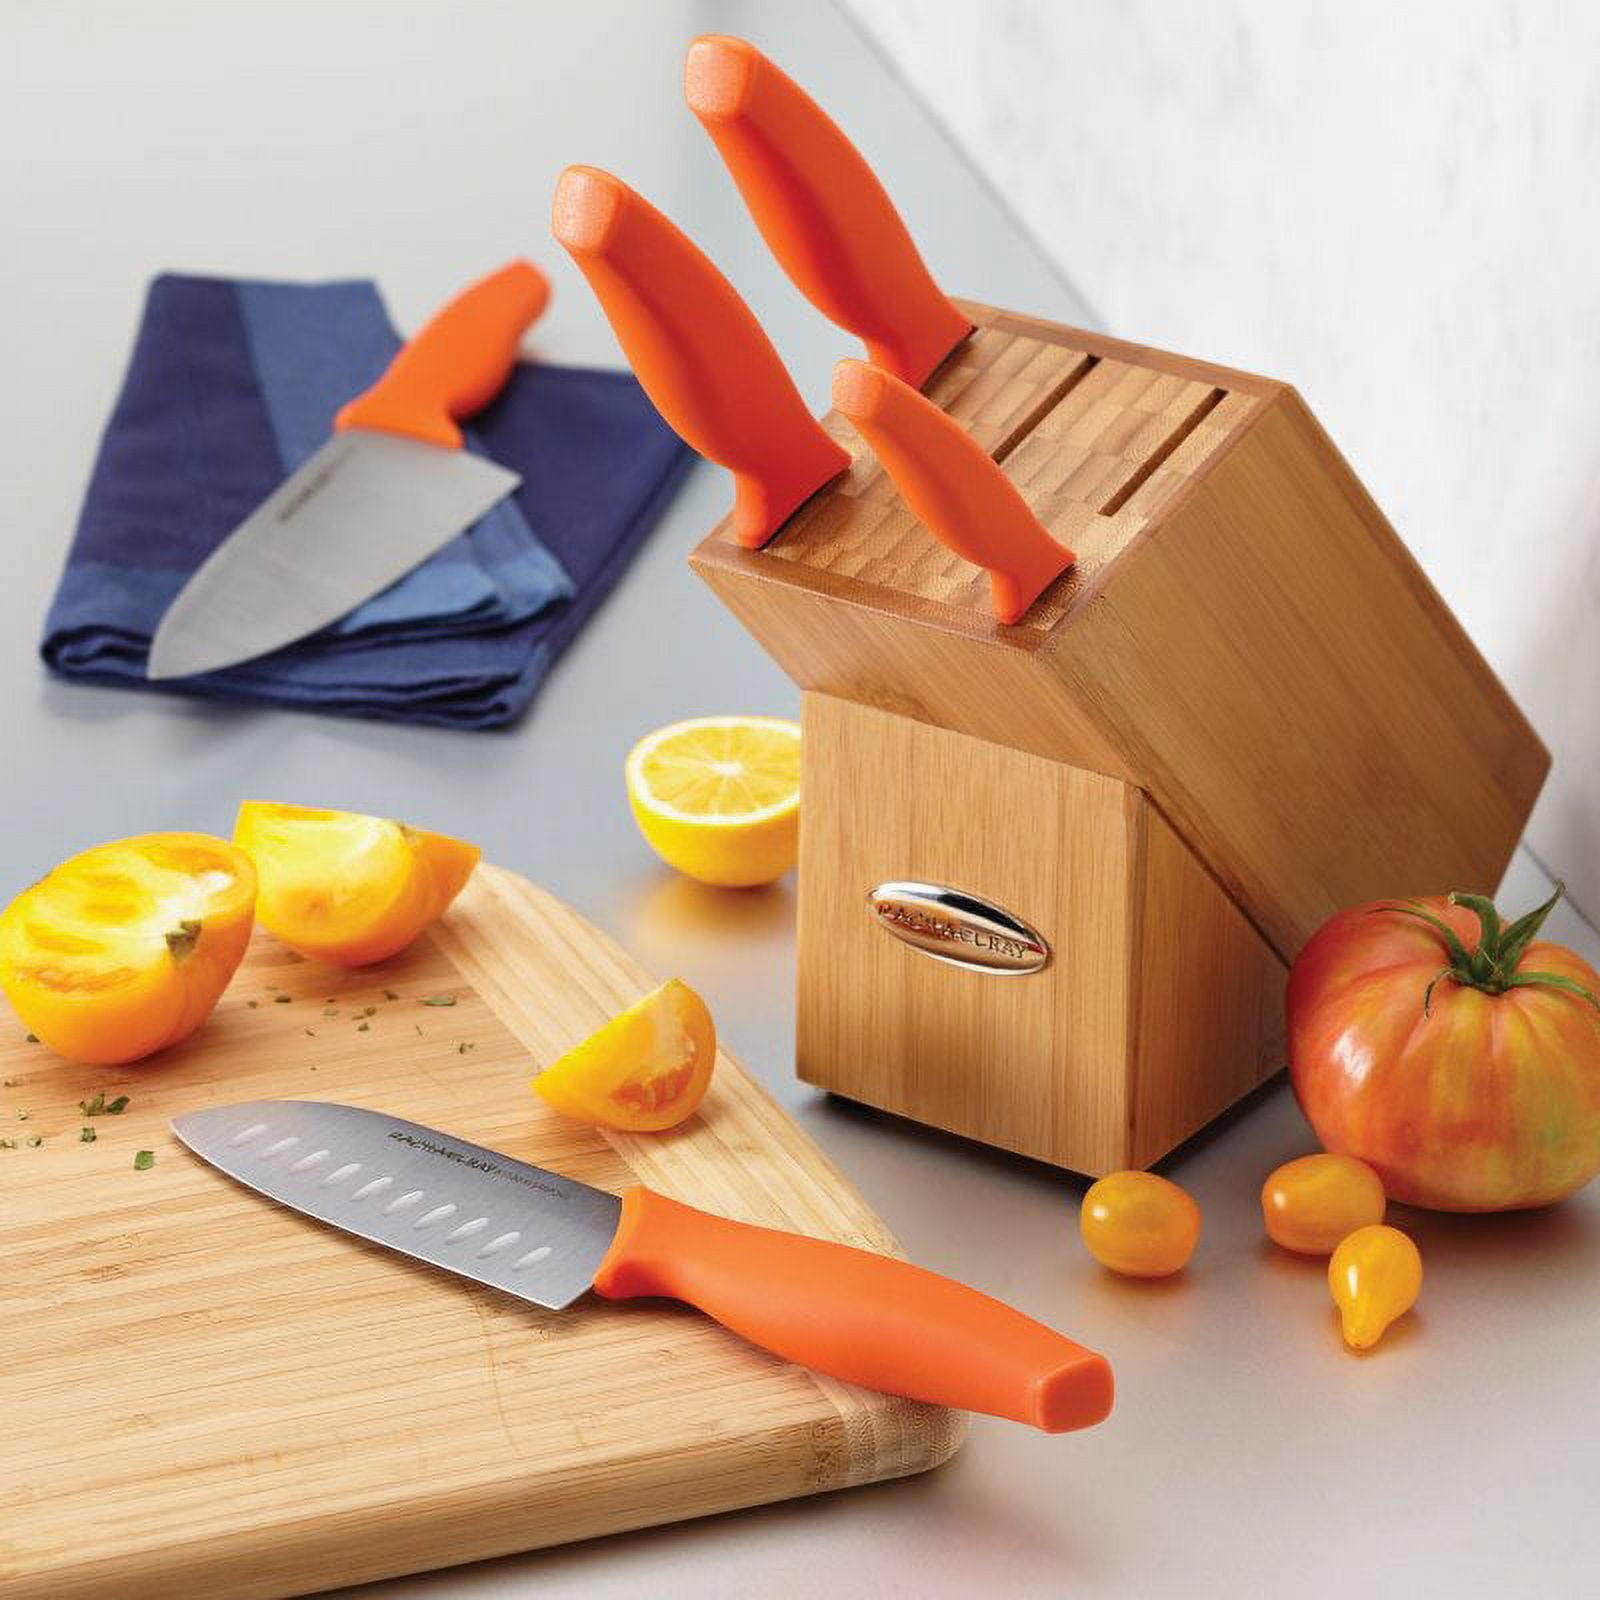 Rachael Ray 10-pc. Colored Knife Set with Manual Sharpener 